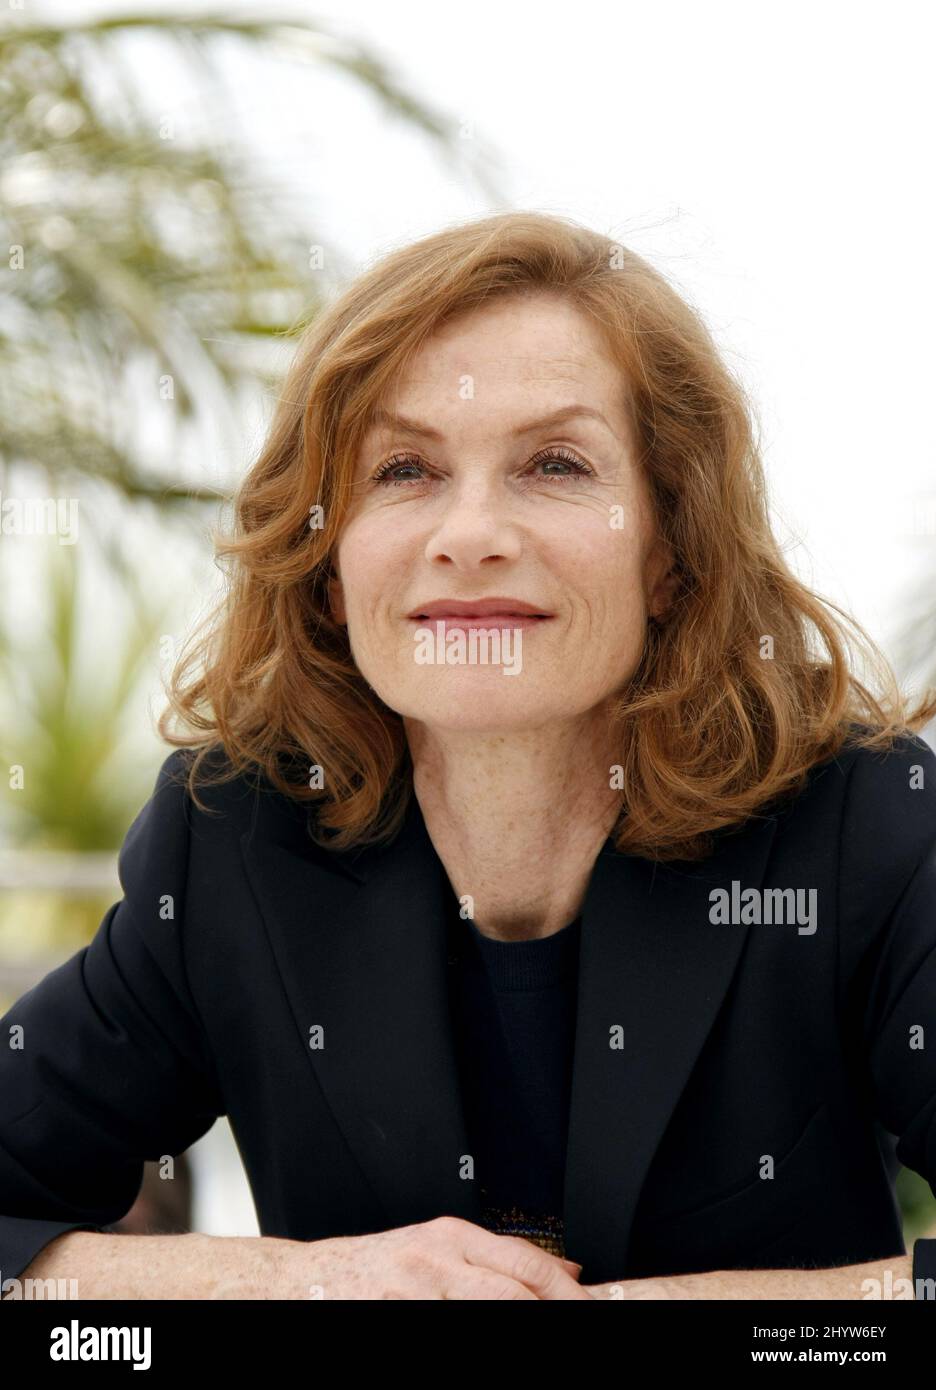 Isabelle Huppert during the jury presentation photocall at the 62nd Annual Cannes Film Festival held at the Palais des Festivals, Cannes, France Stock Photo